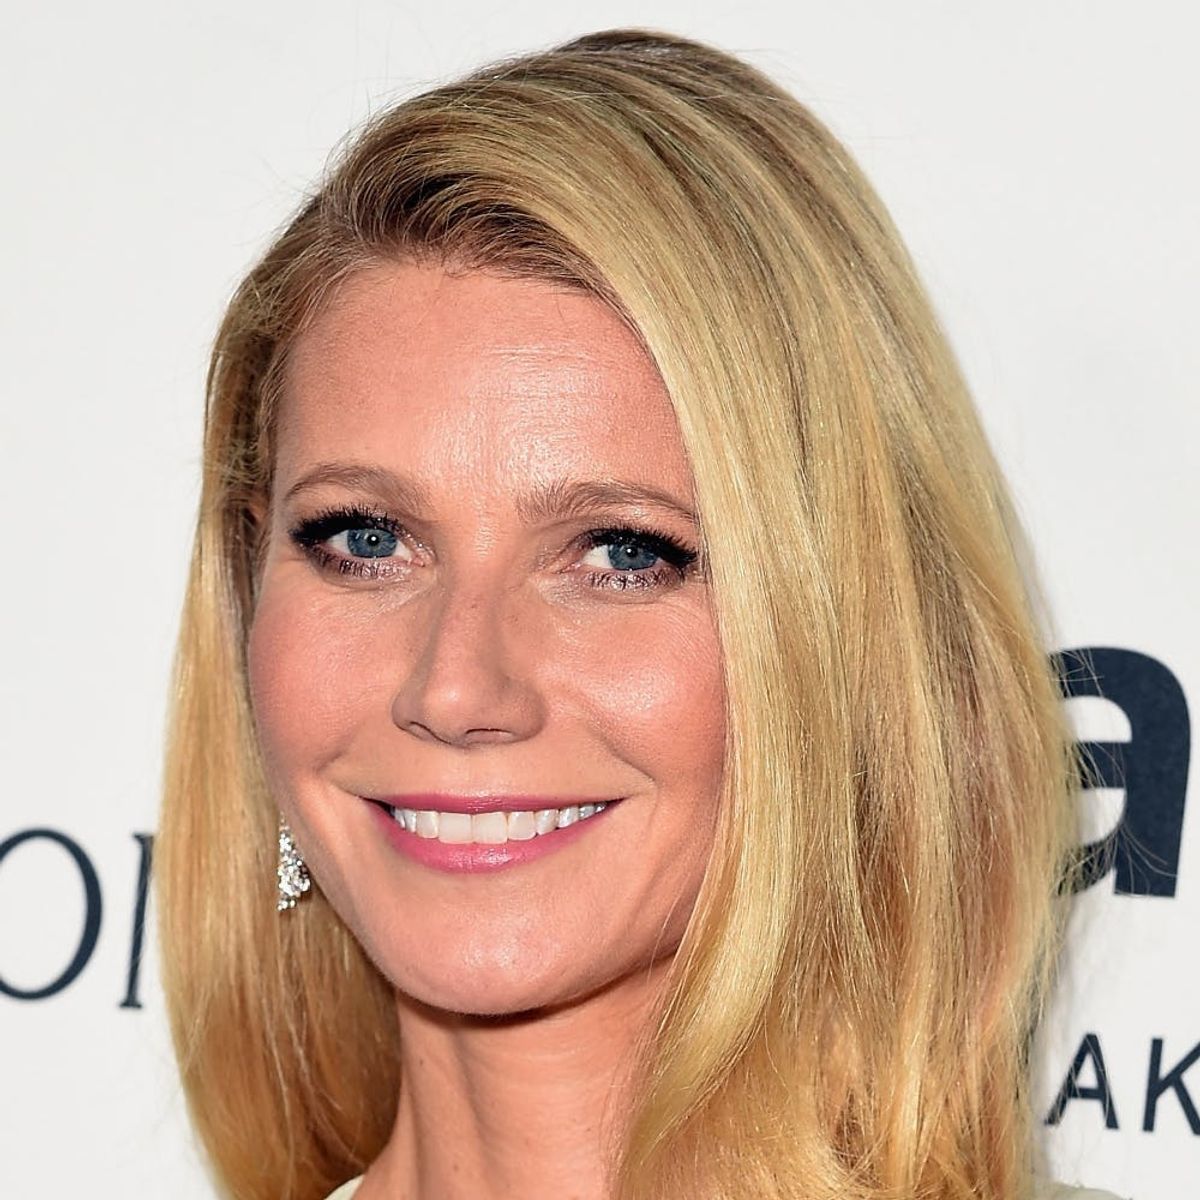 How Much Gwyneth Paltrow’s Morning Smoothie Costs to Make